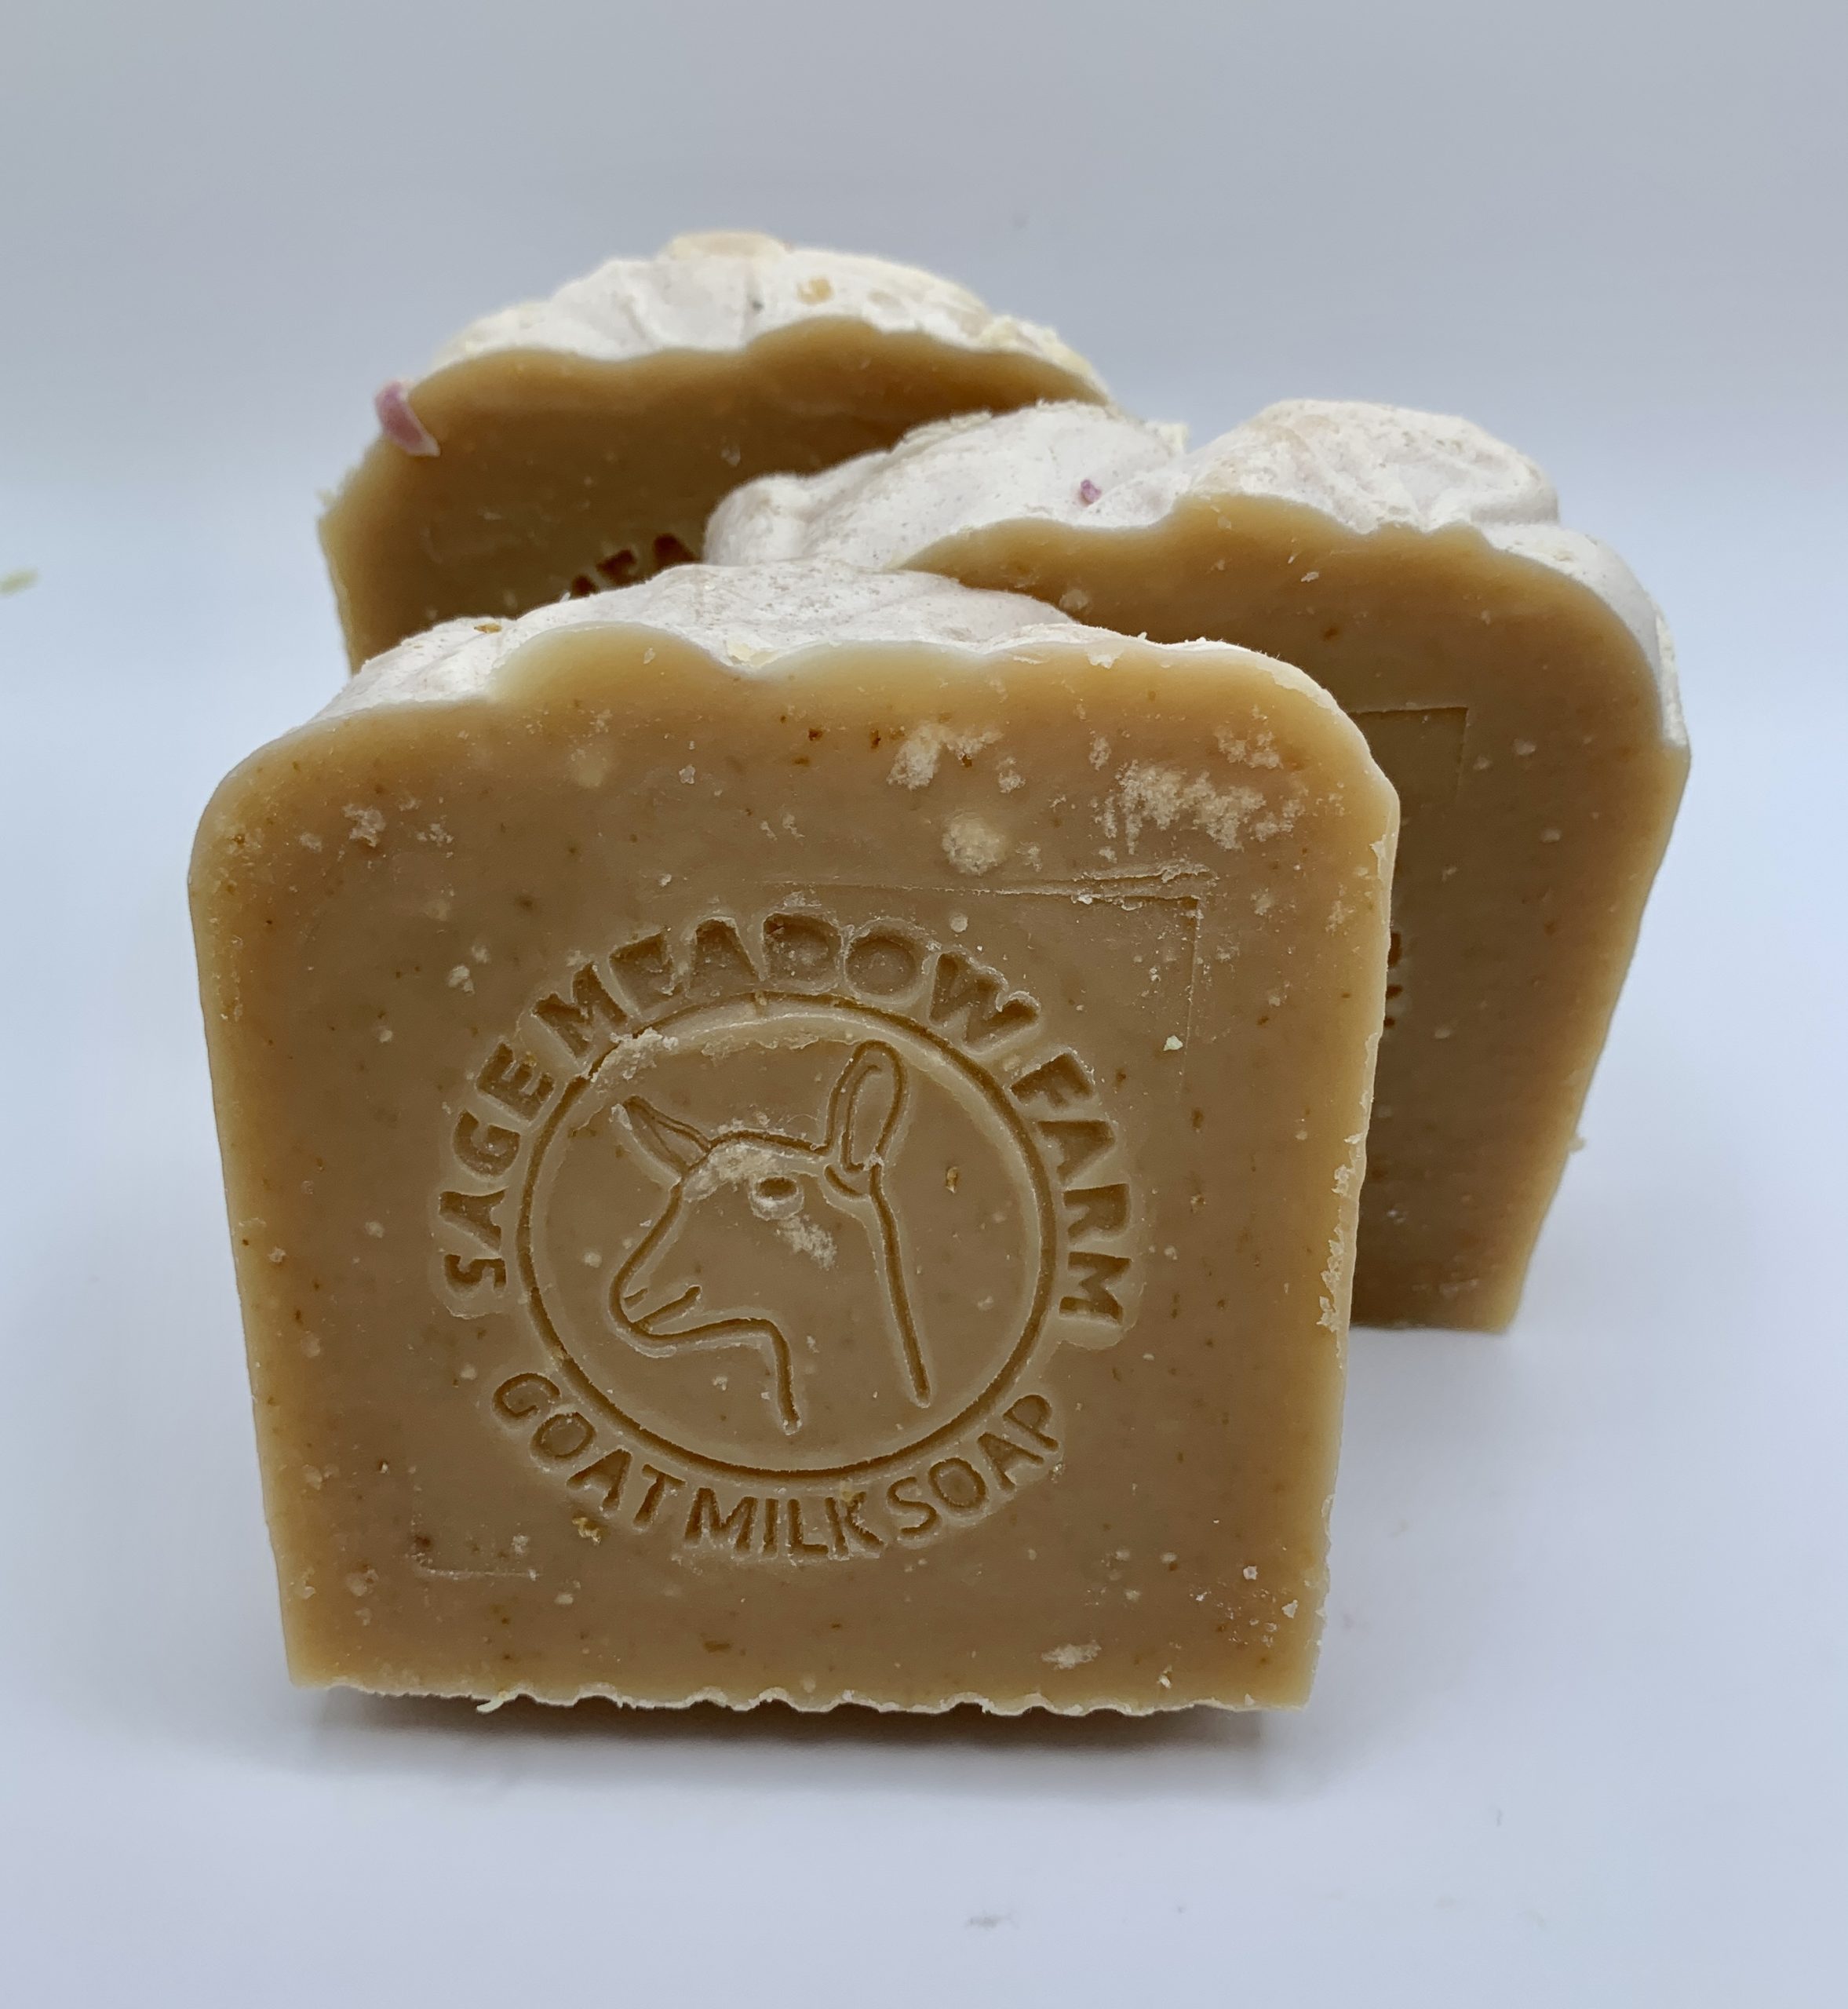 Unscented (Fragrant-Free) Soap